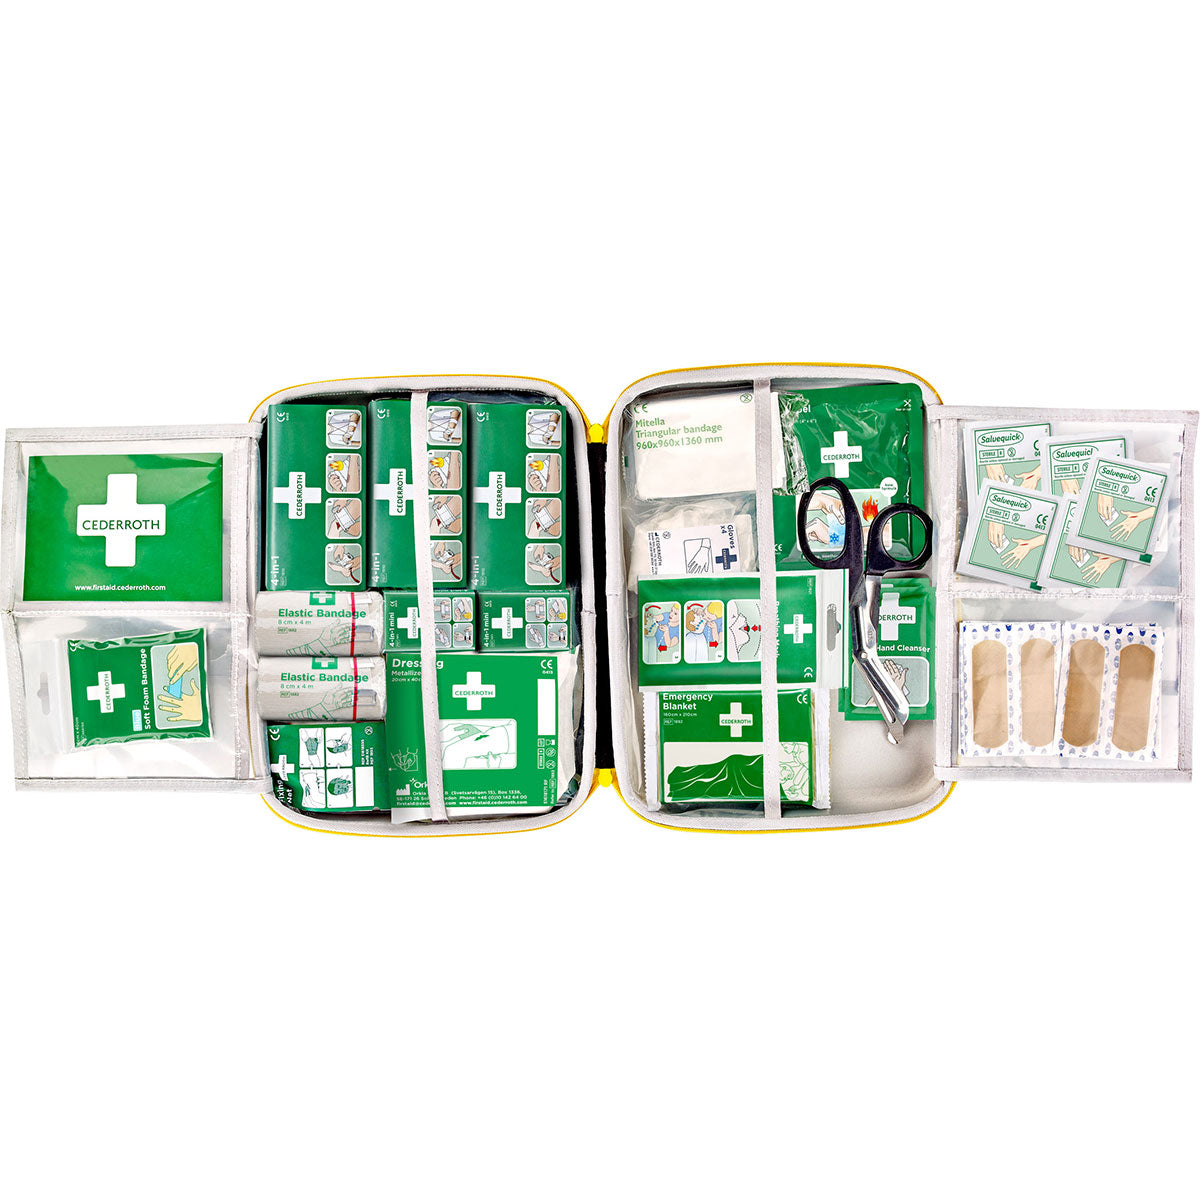 First Aid Kit Large